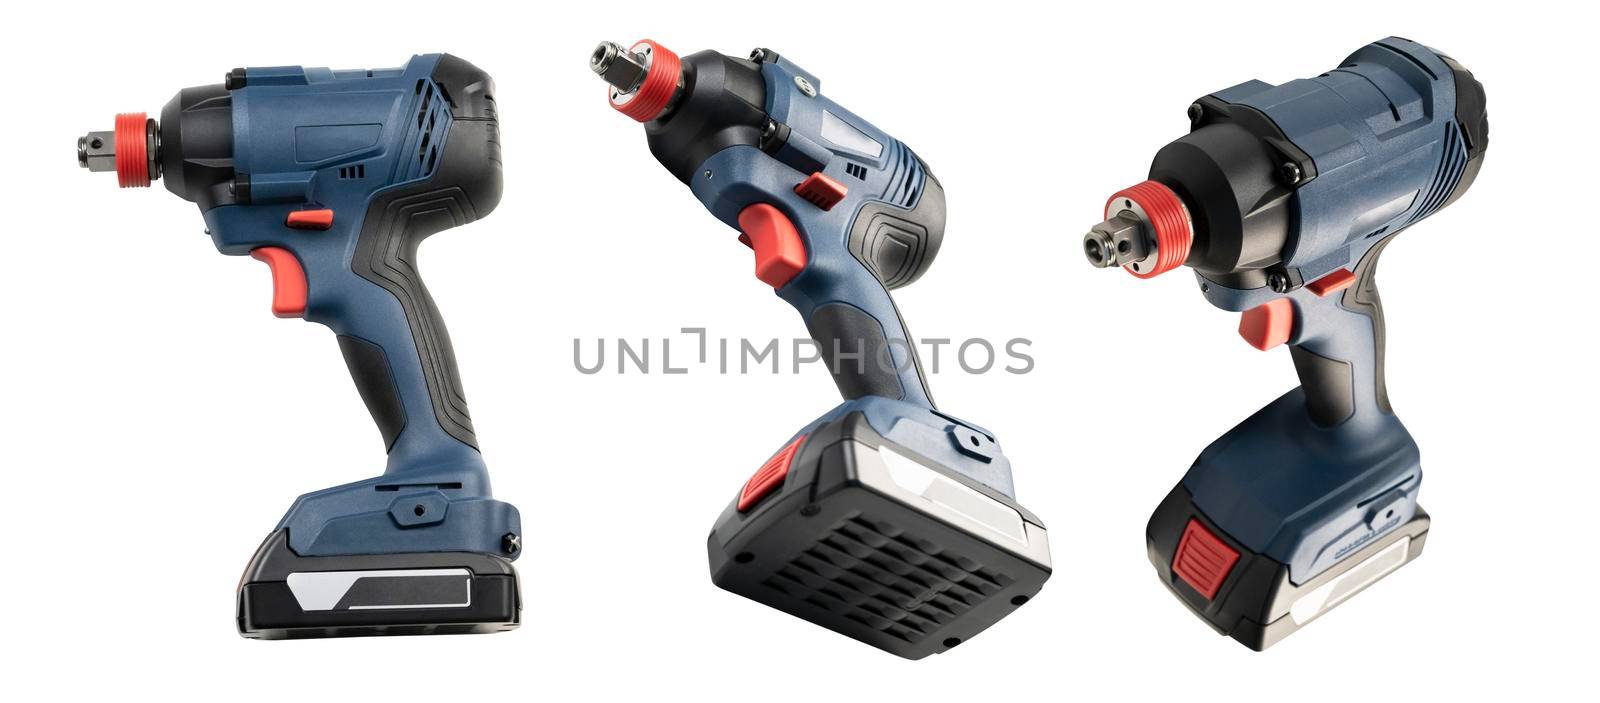 Electric screwdriver in different angles isolated on a white background.